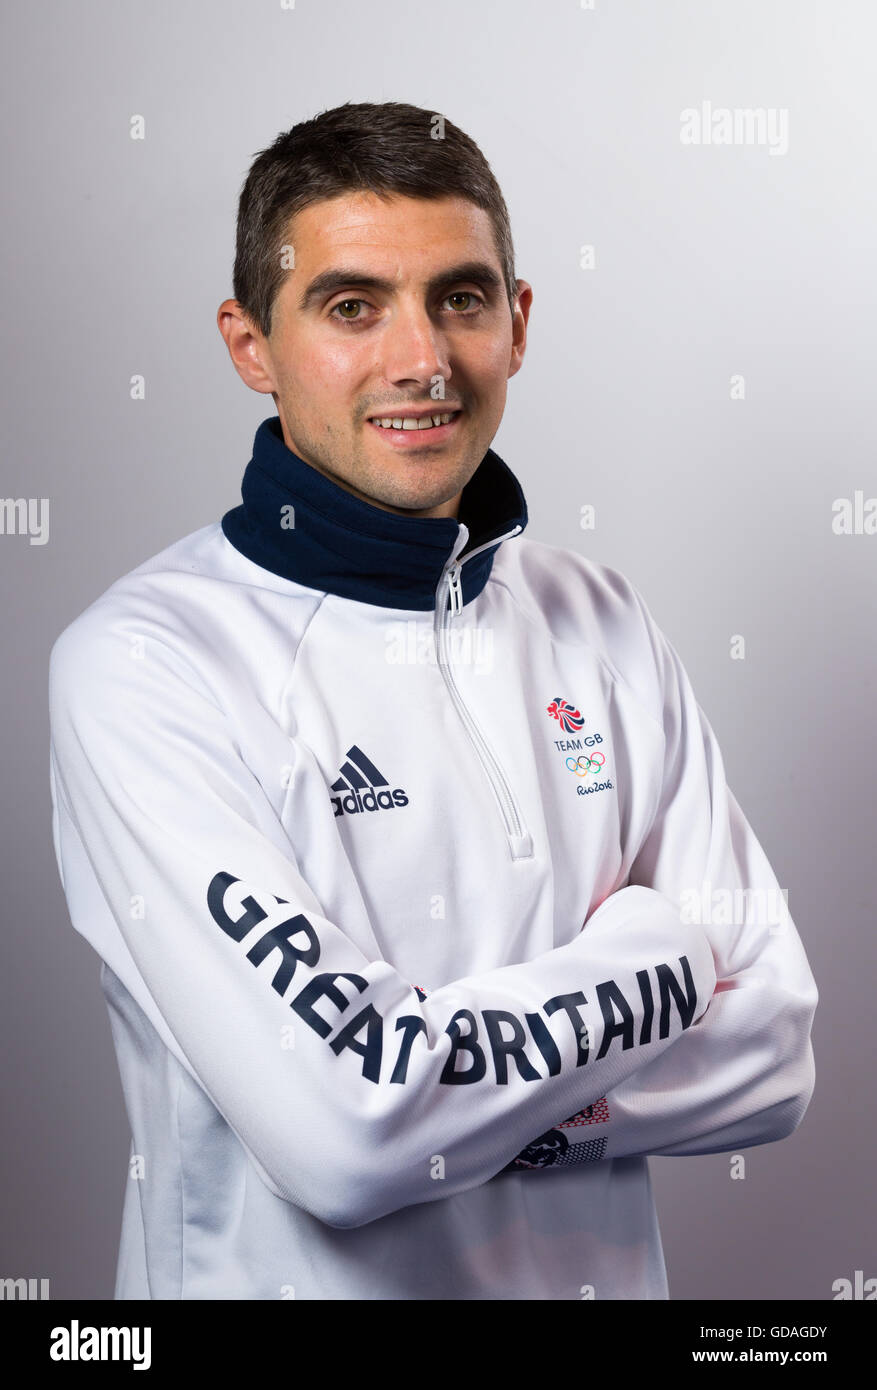 Robert Mullett during the Team GB Kitting Out session at the NEC, Birmingham. Stock Photo